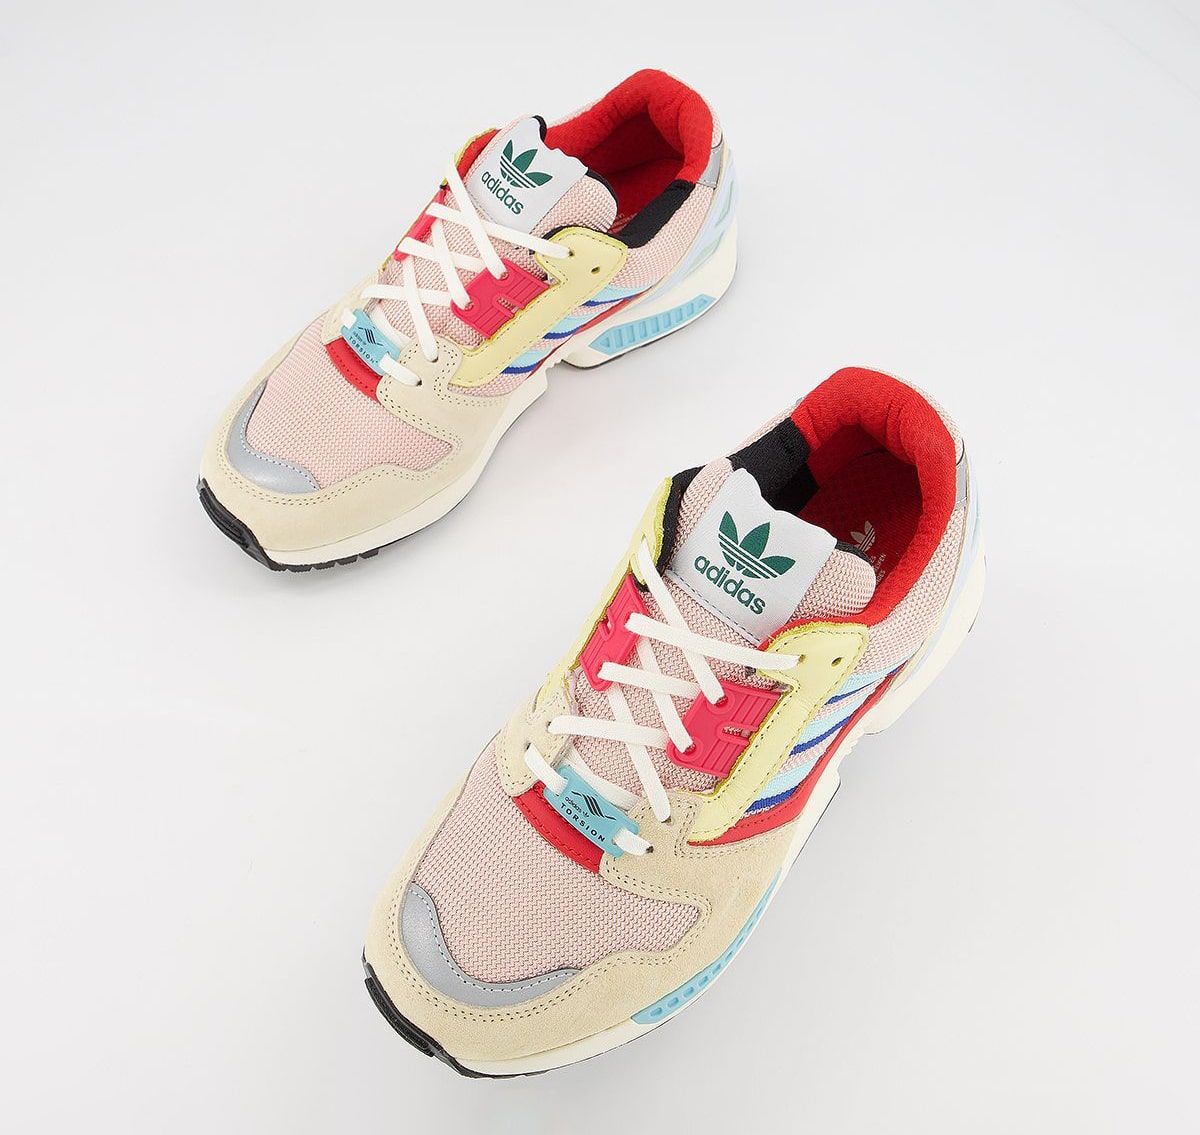 Available Now // adidas ZX 8000 “Vapour Pink” | House of Heat°